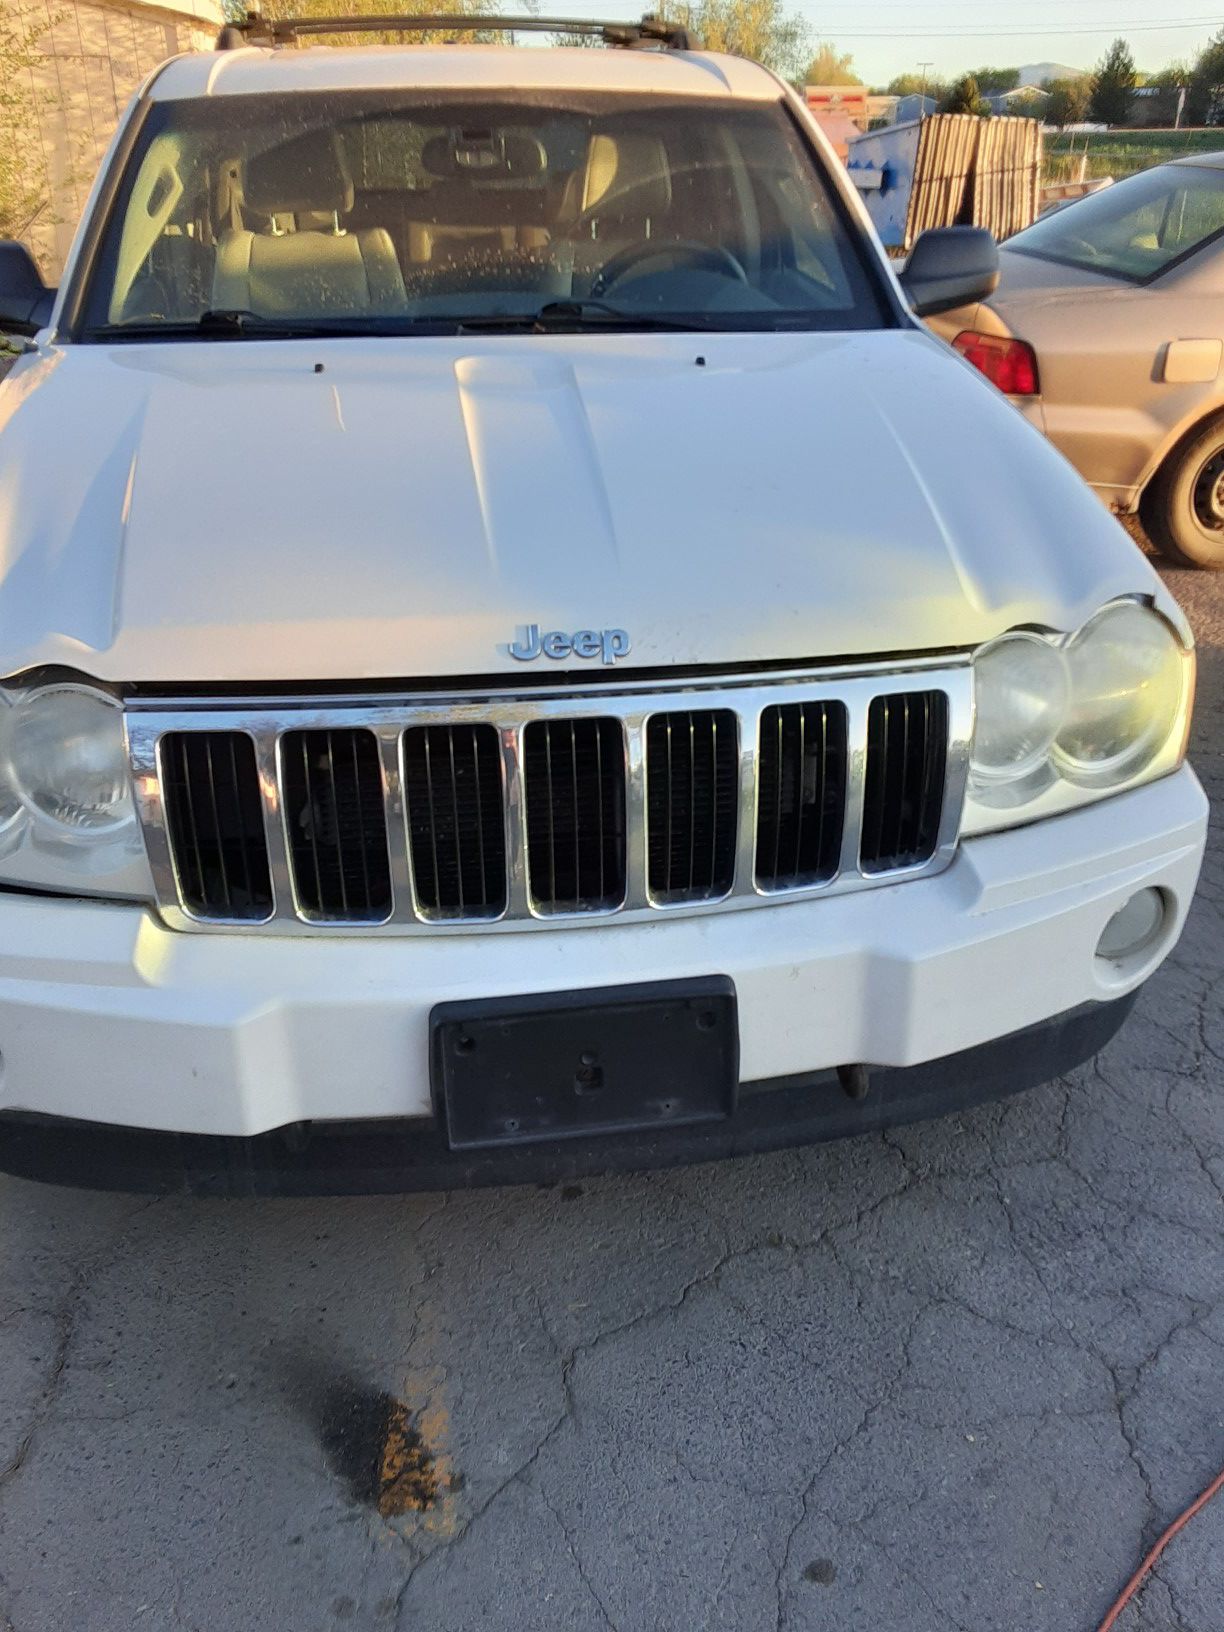 05 jeep grand Cherokee 5.7 hemi parts out or whole